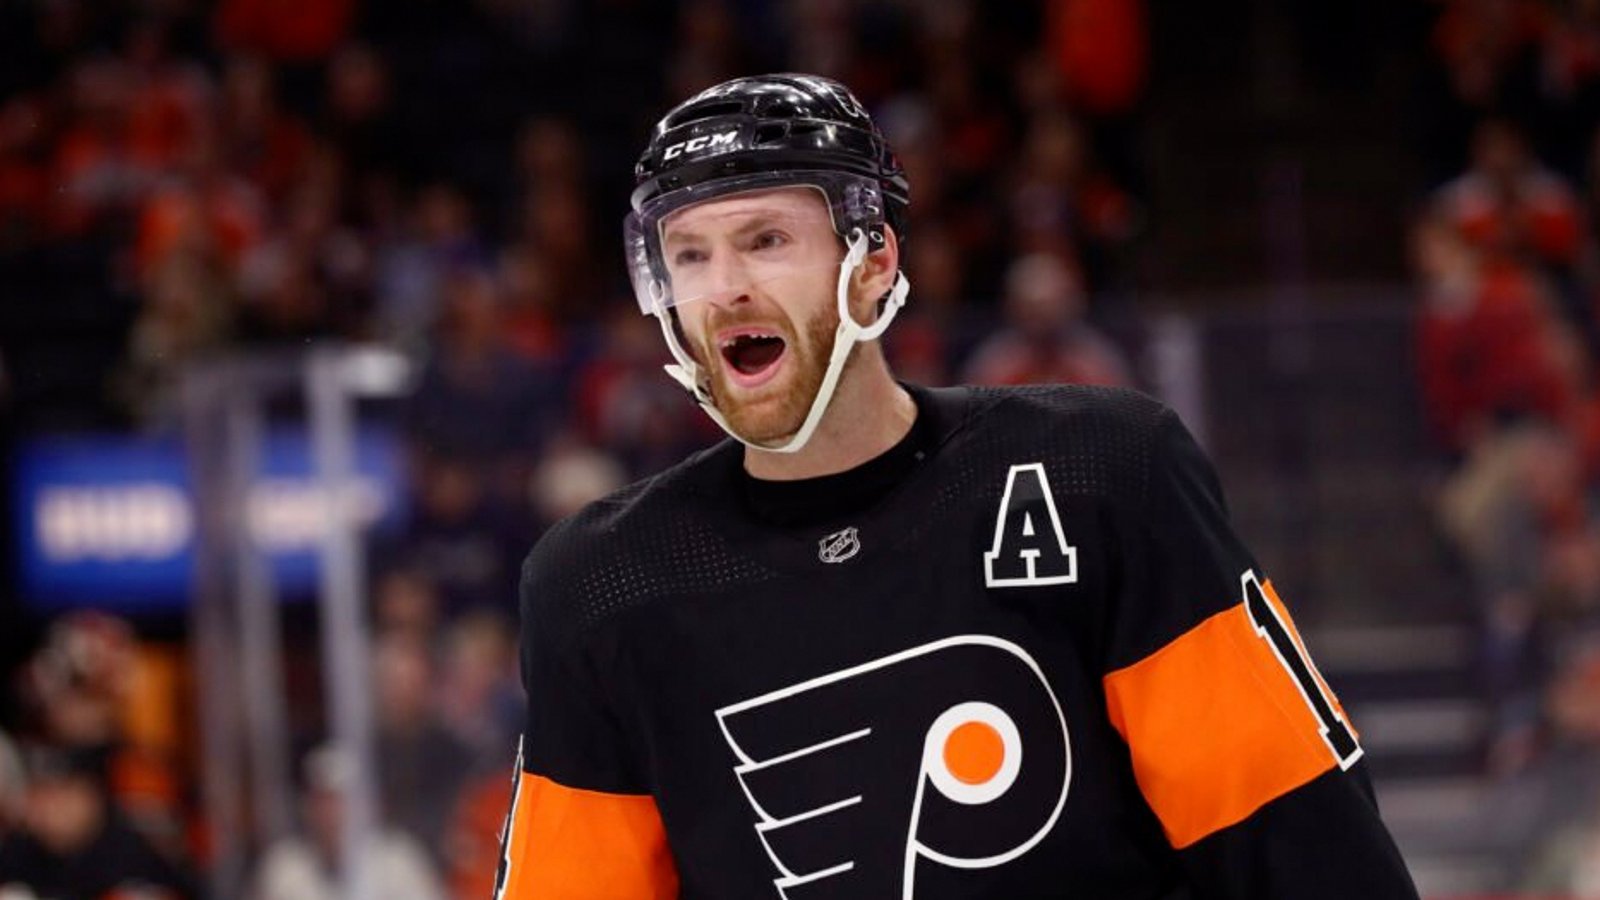 Sean Couturier re-ups with Flyers on a massive eight year deal